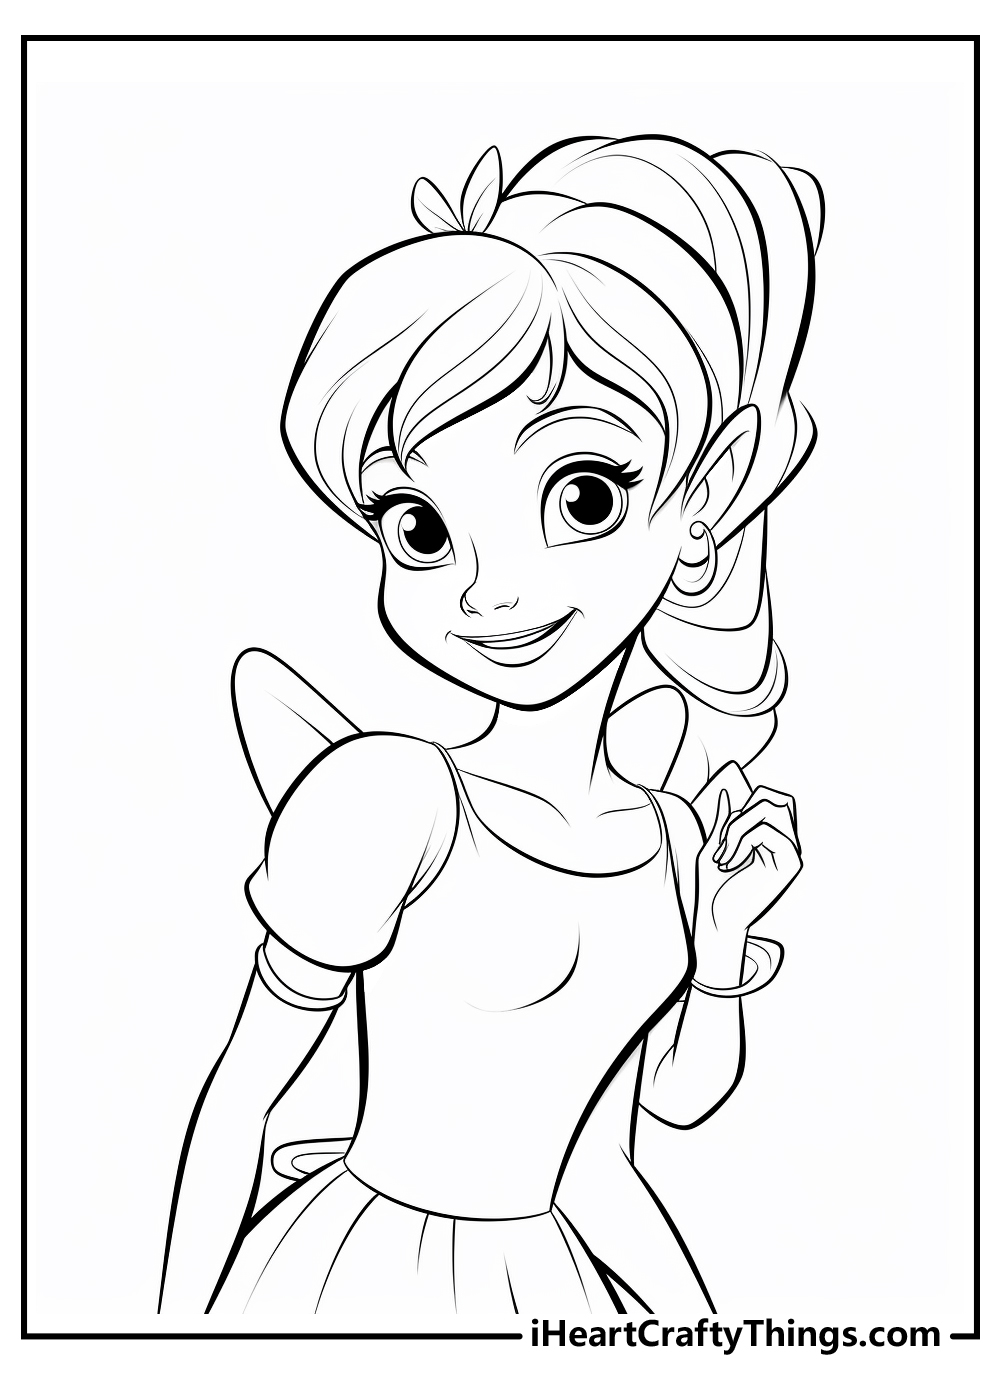 tinkerbell coloring printable for kids